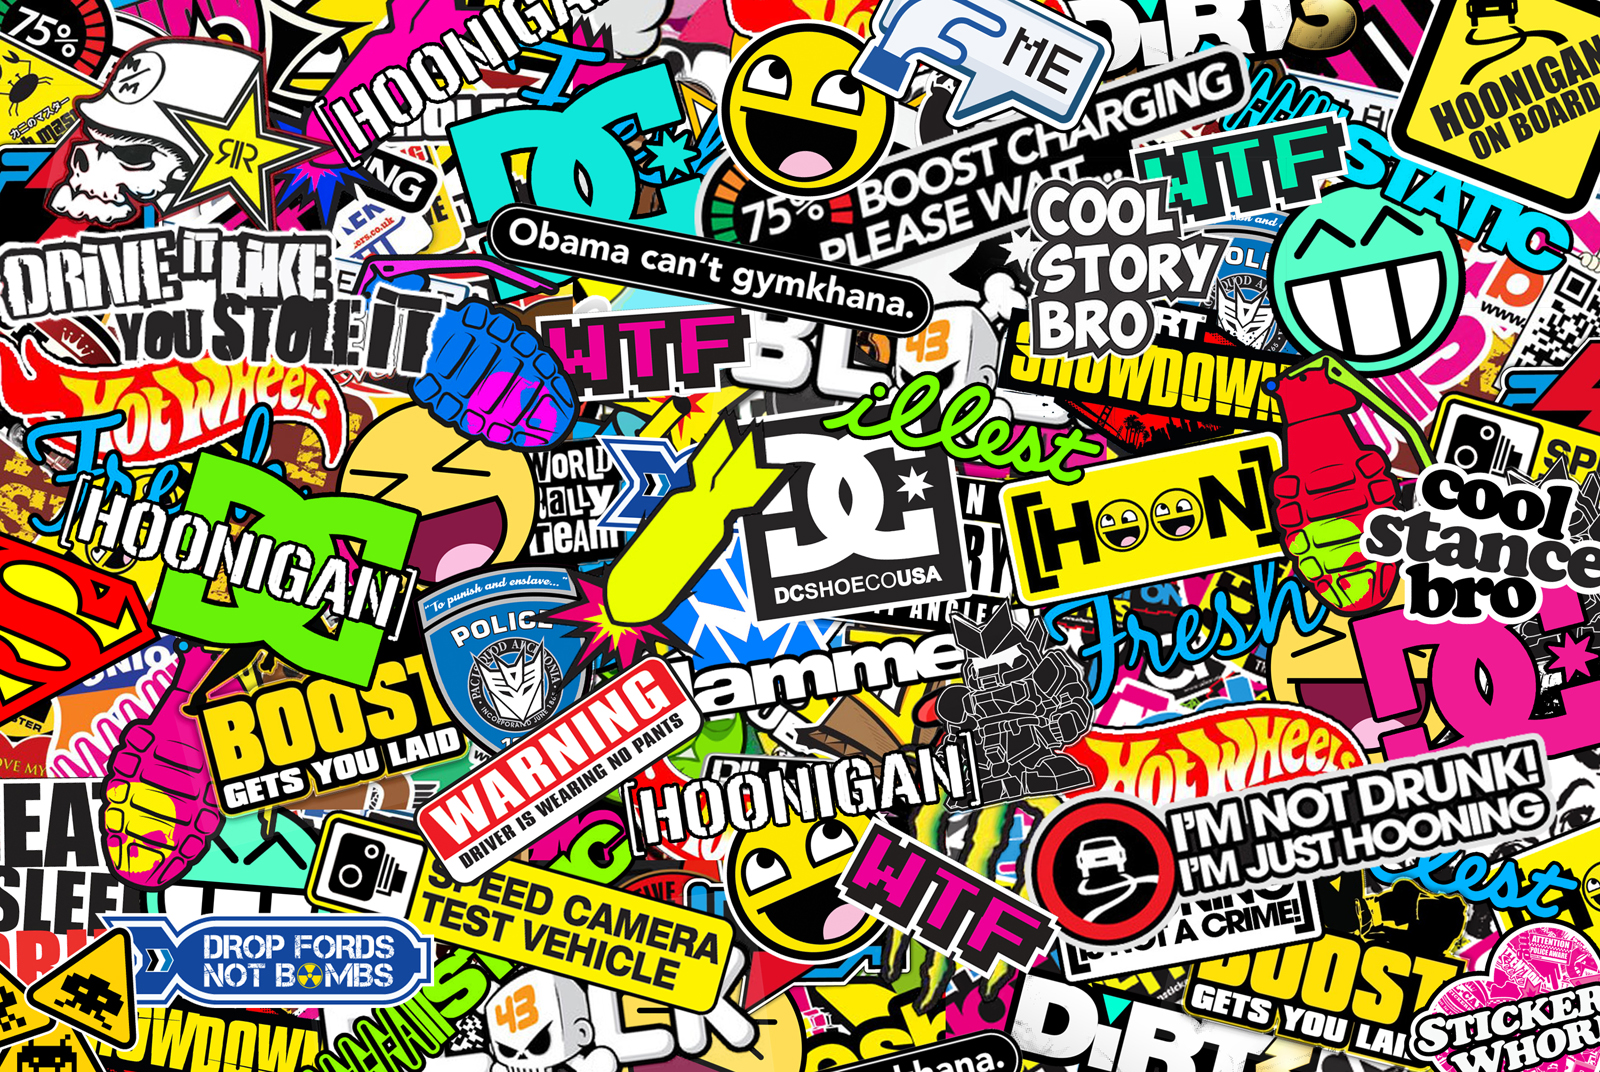 Amazing Sticker Bomb Pictures & Backgrounds